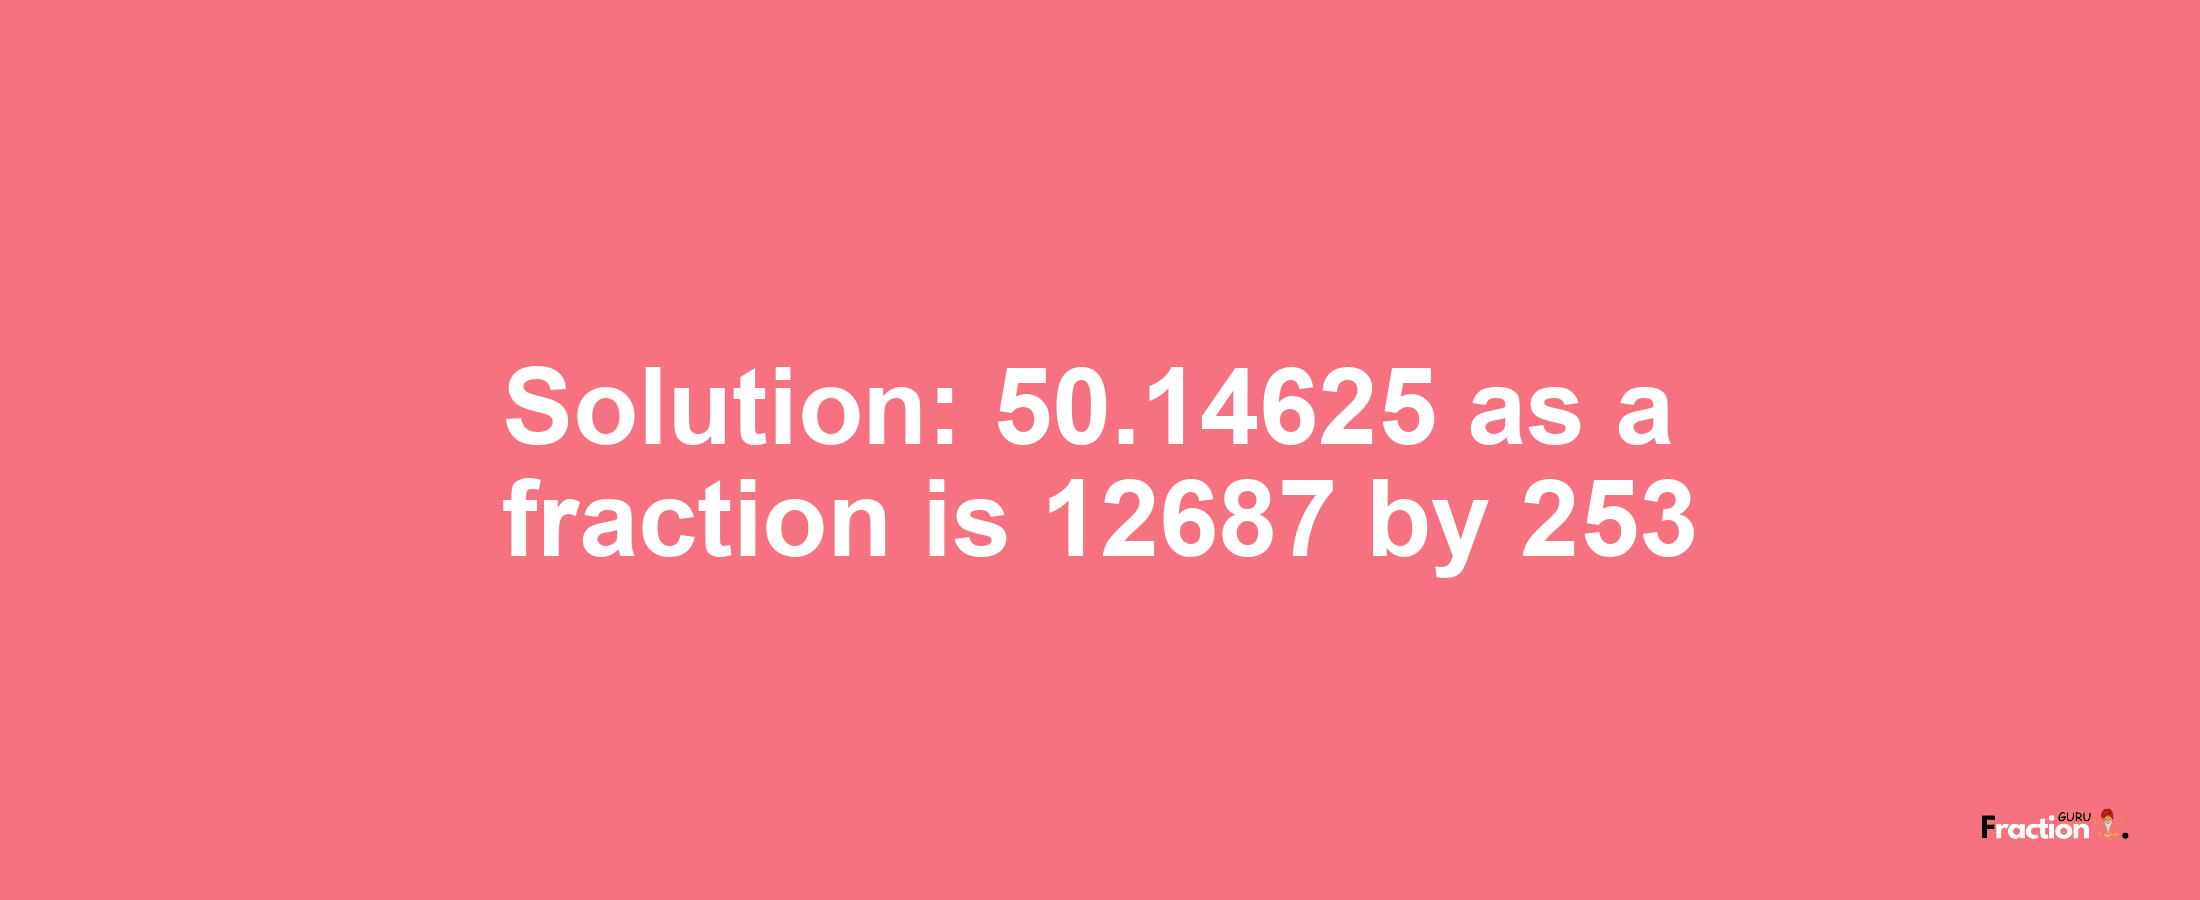 Solution:50.14625 as a fraction is 12687/253